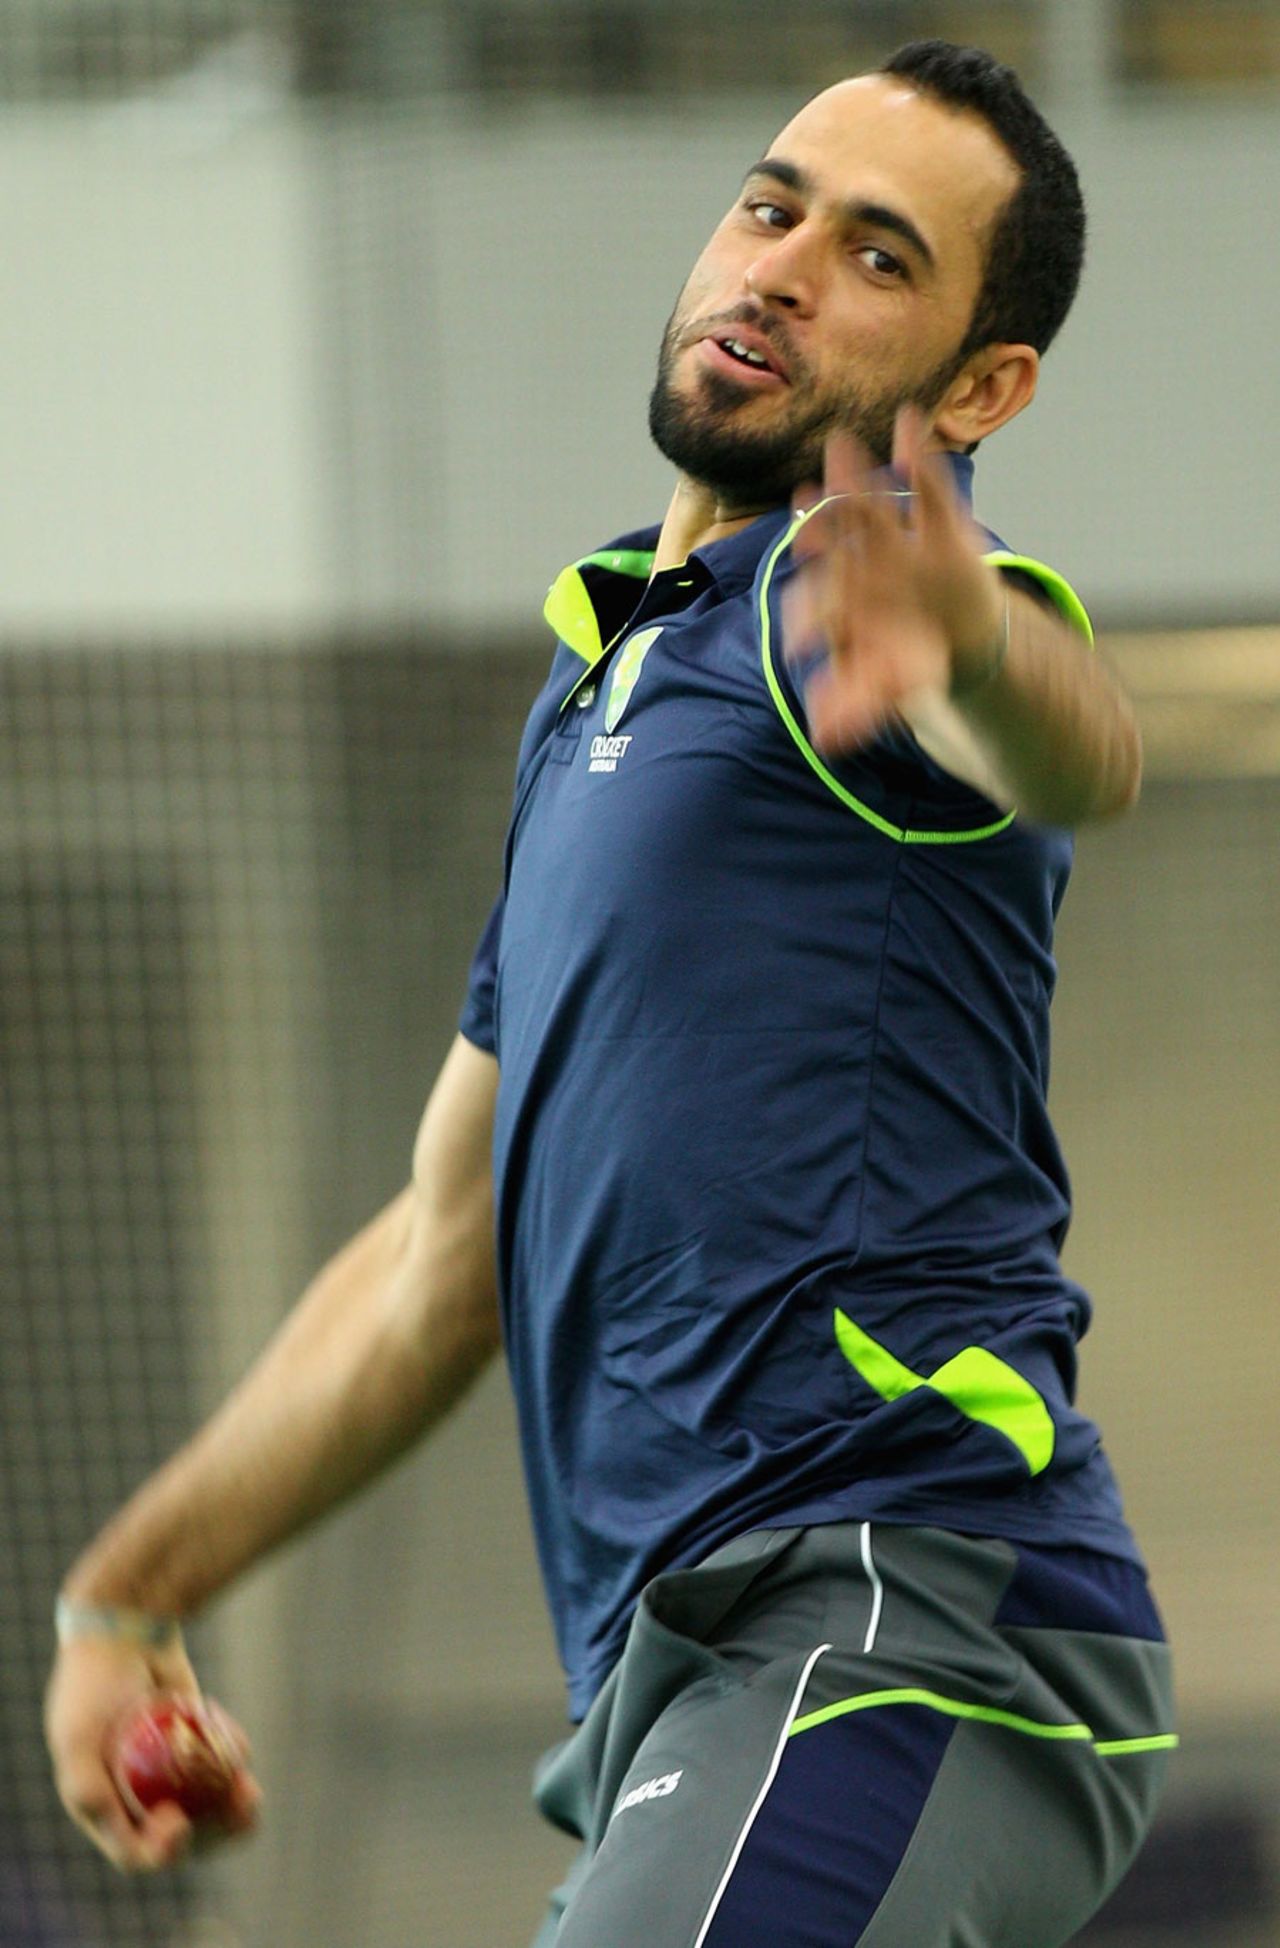 Fawad Ahmed bowls during a media session in Melbourne, June 6, 2013